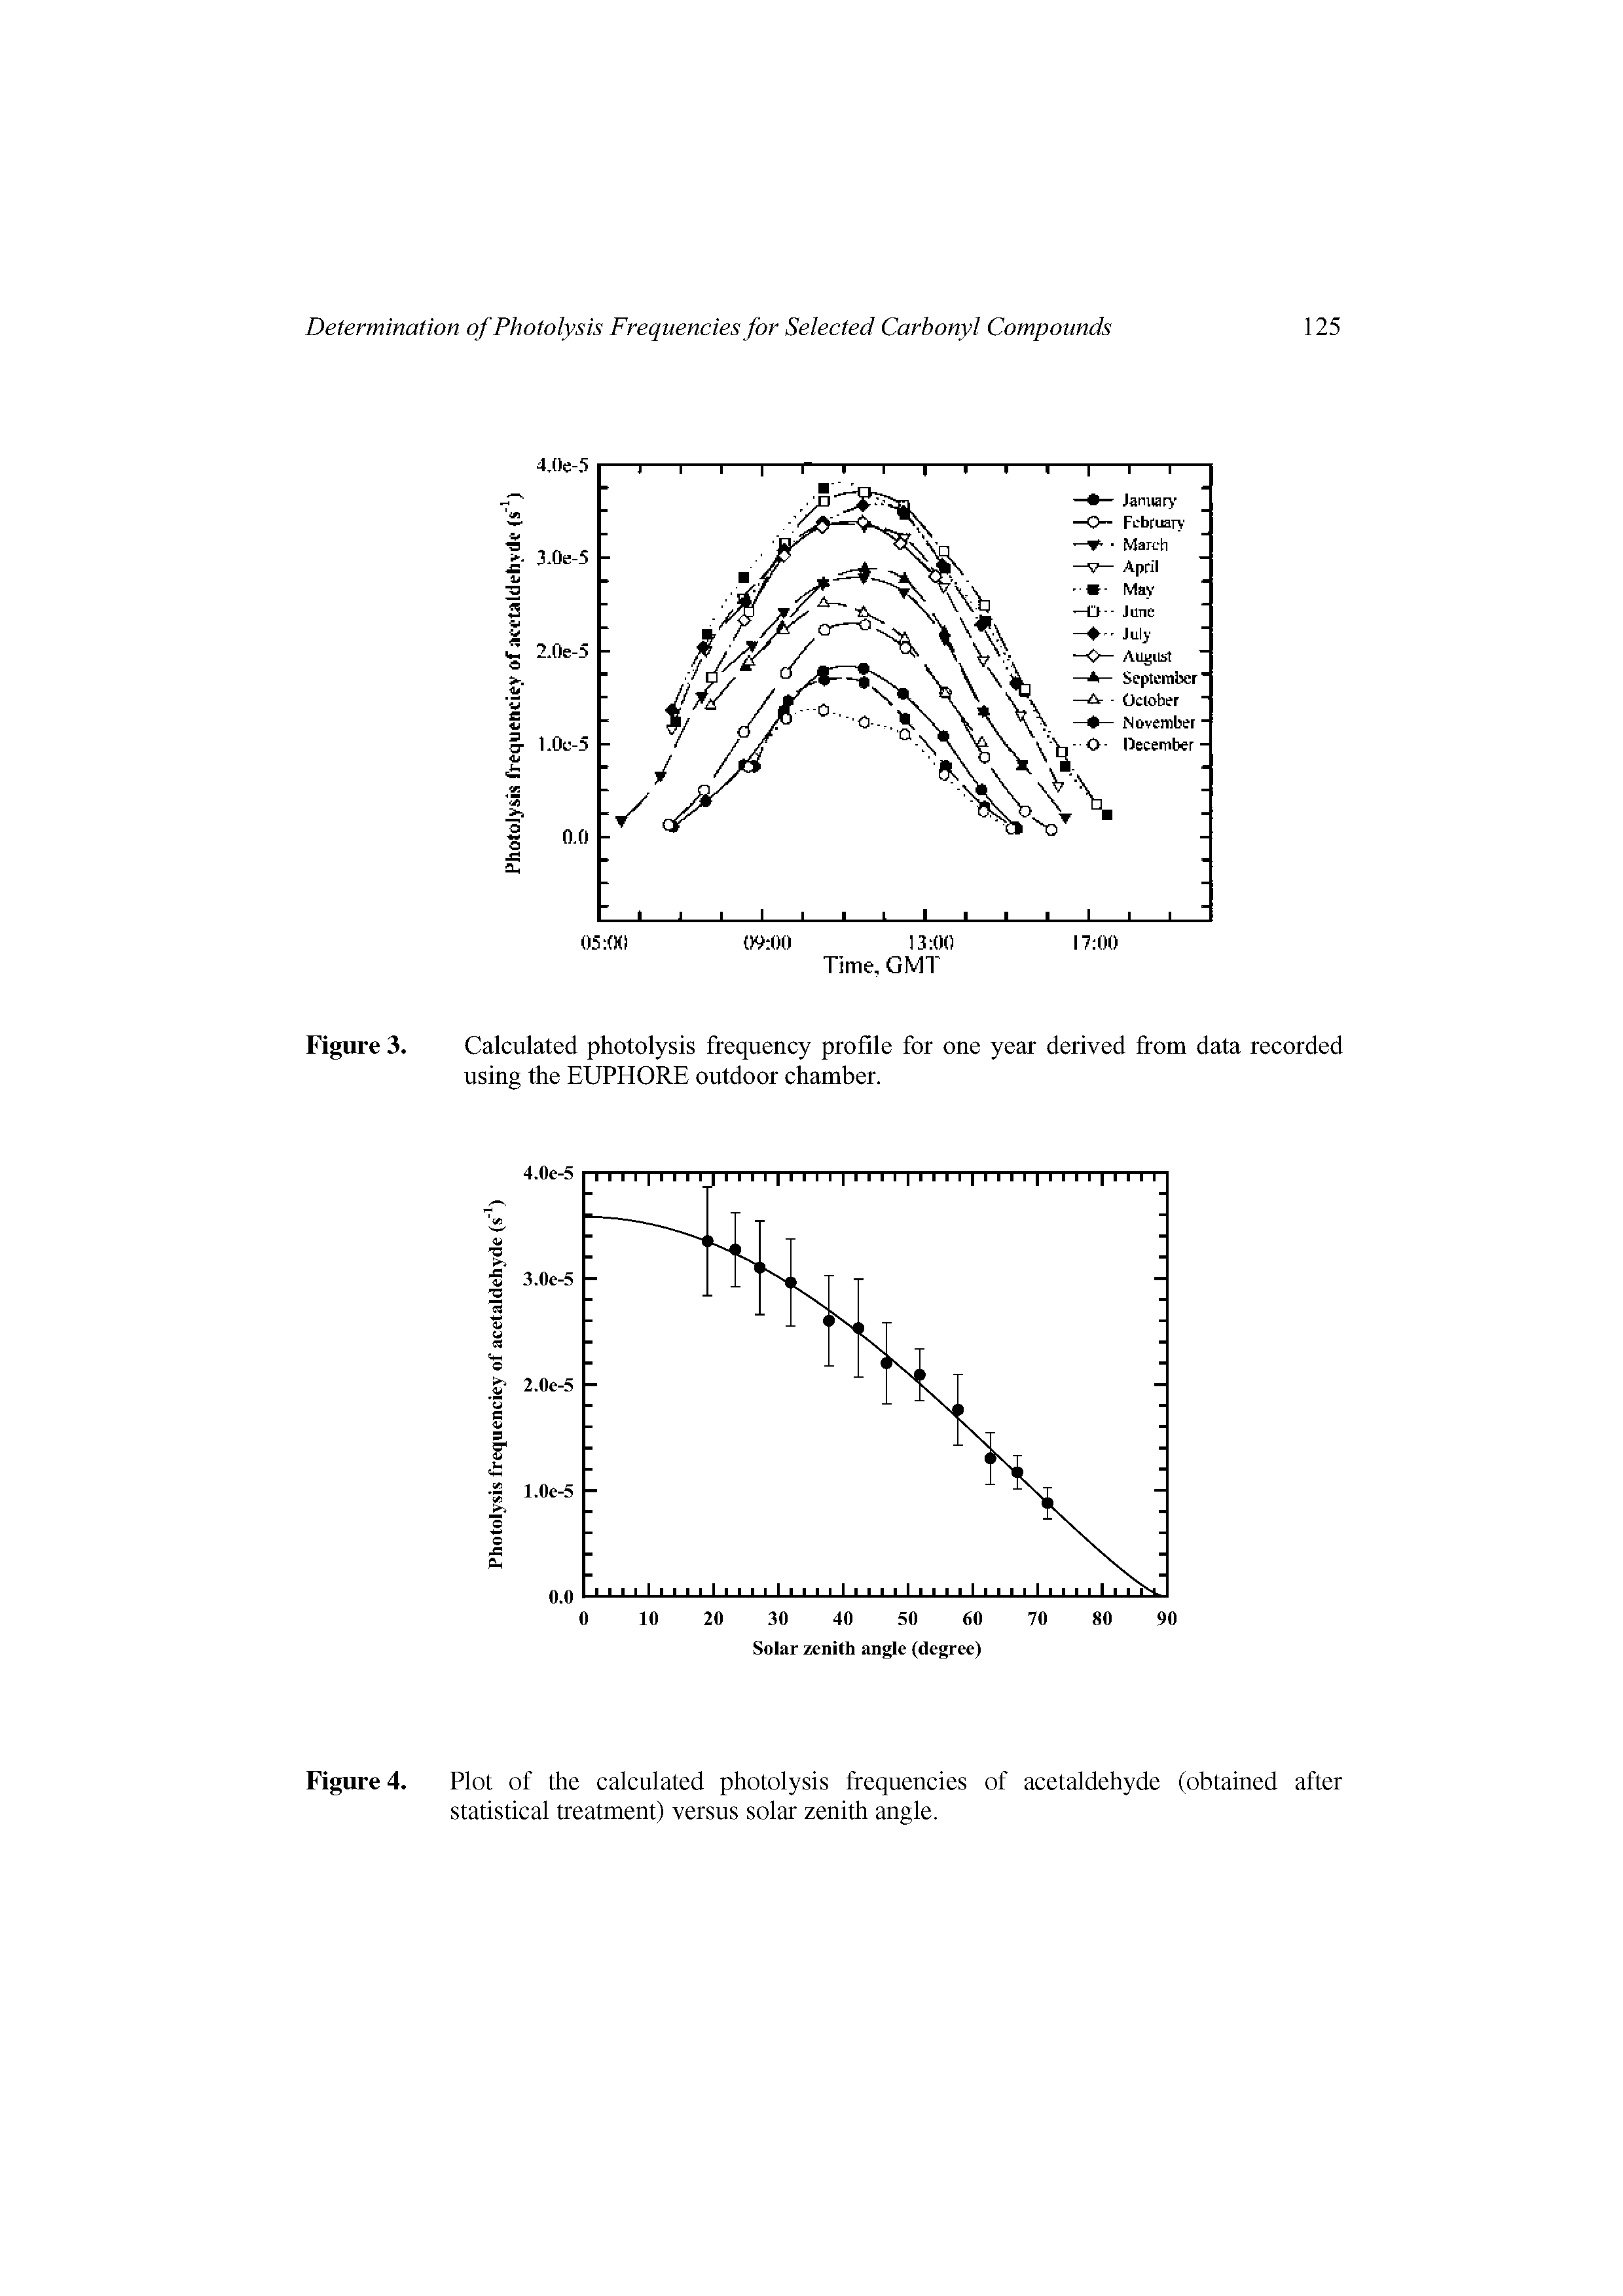 Figure 3. Calculated photolysis frequency profile for one year derived from data recorded using the EUPHORE outdoor chamber.